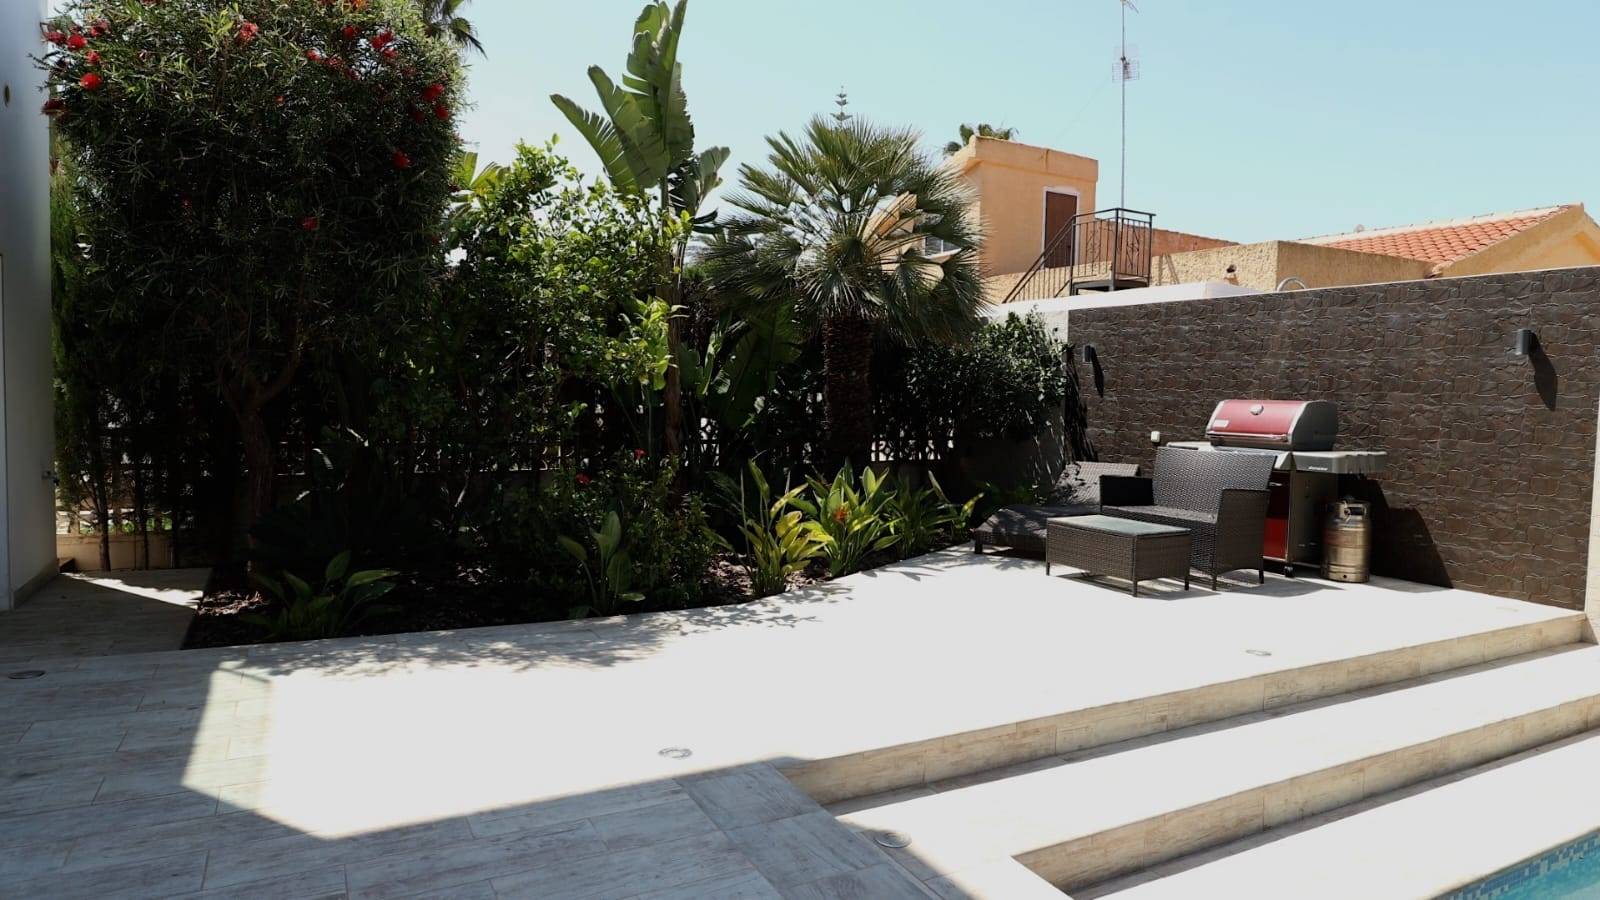 LUXURY VILLA IN URB. LOS ANGELES WITH SALTWATER POOL AND NICE PLOT